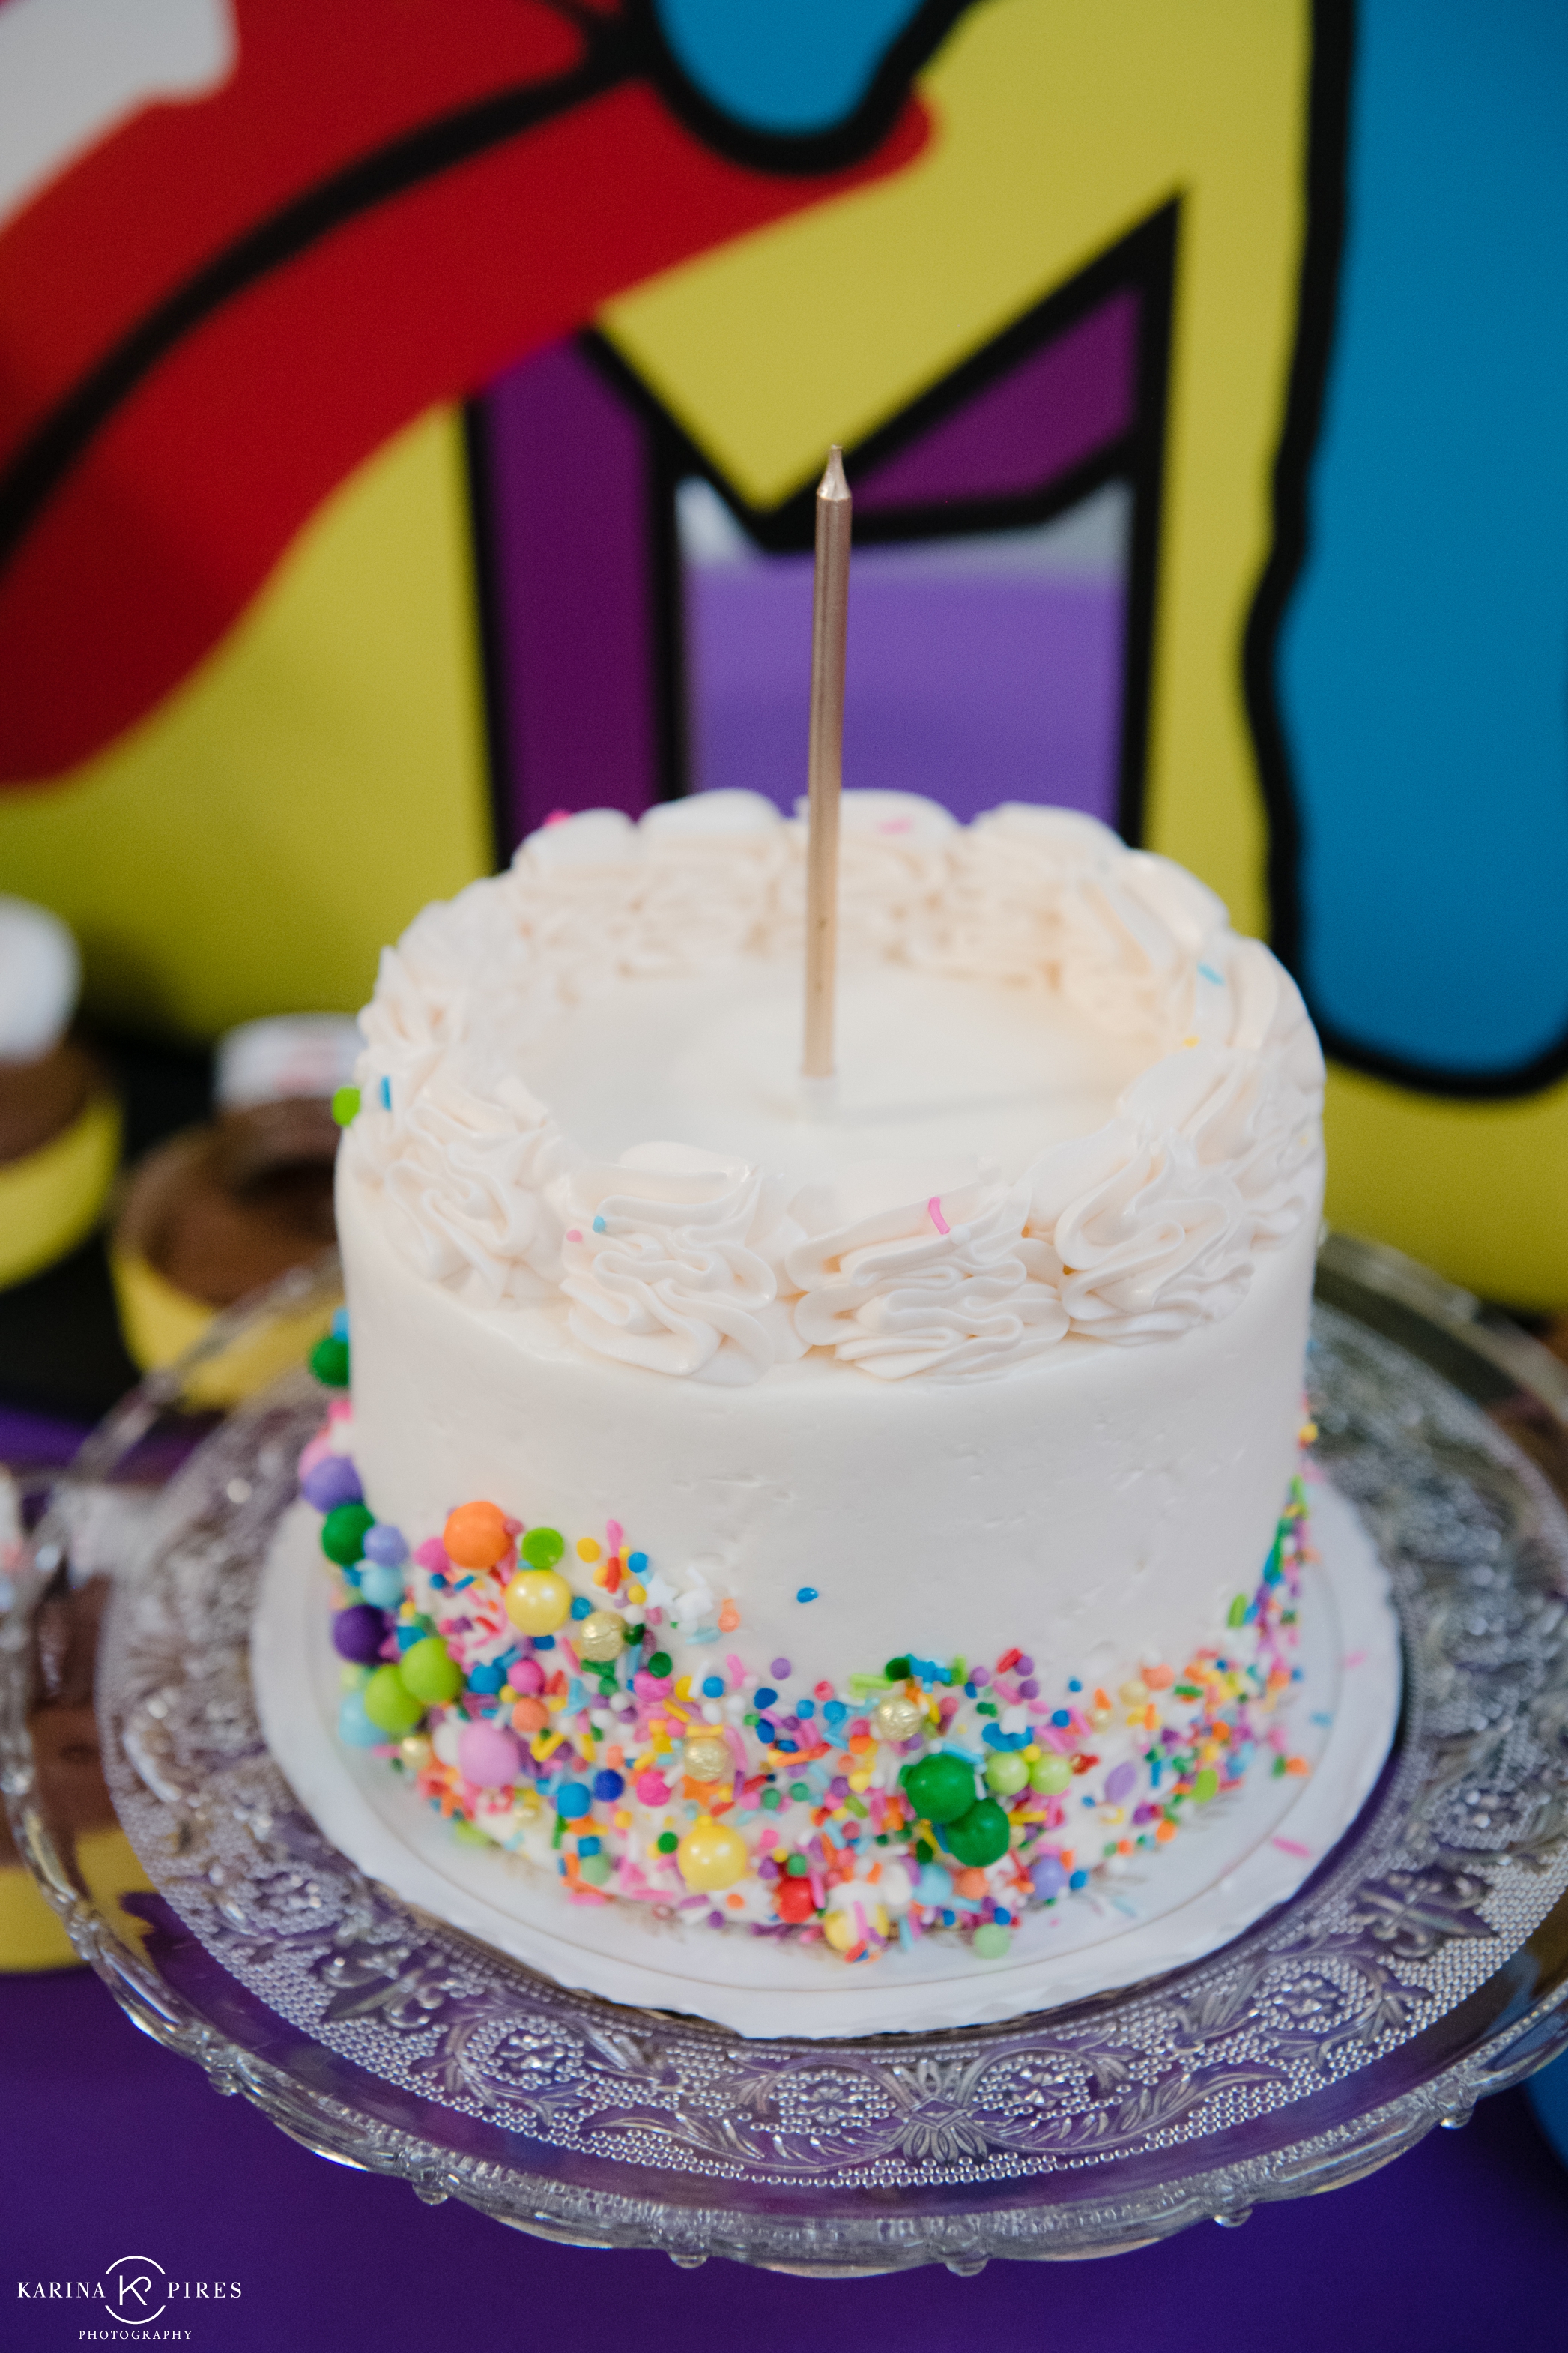 Single tier white cake, covered in lots of sprinkles and candy